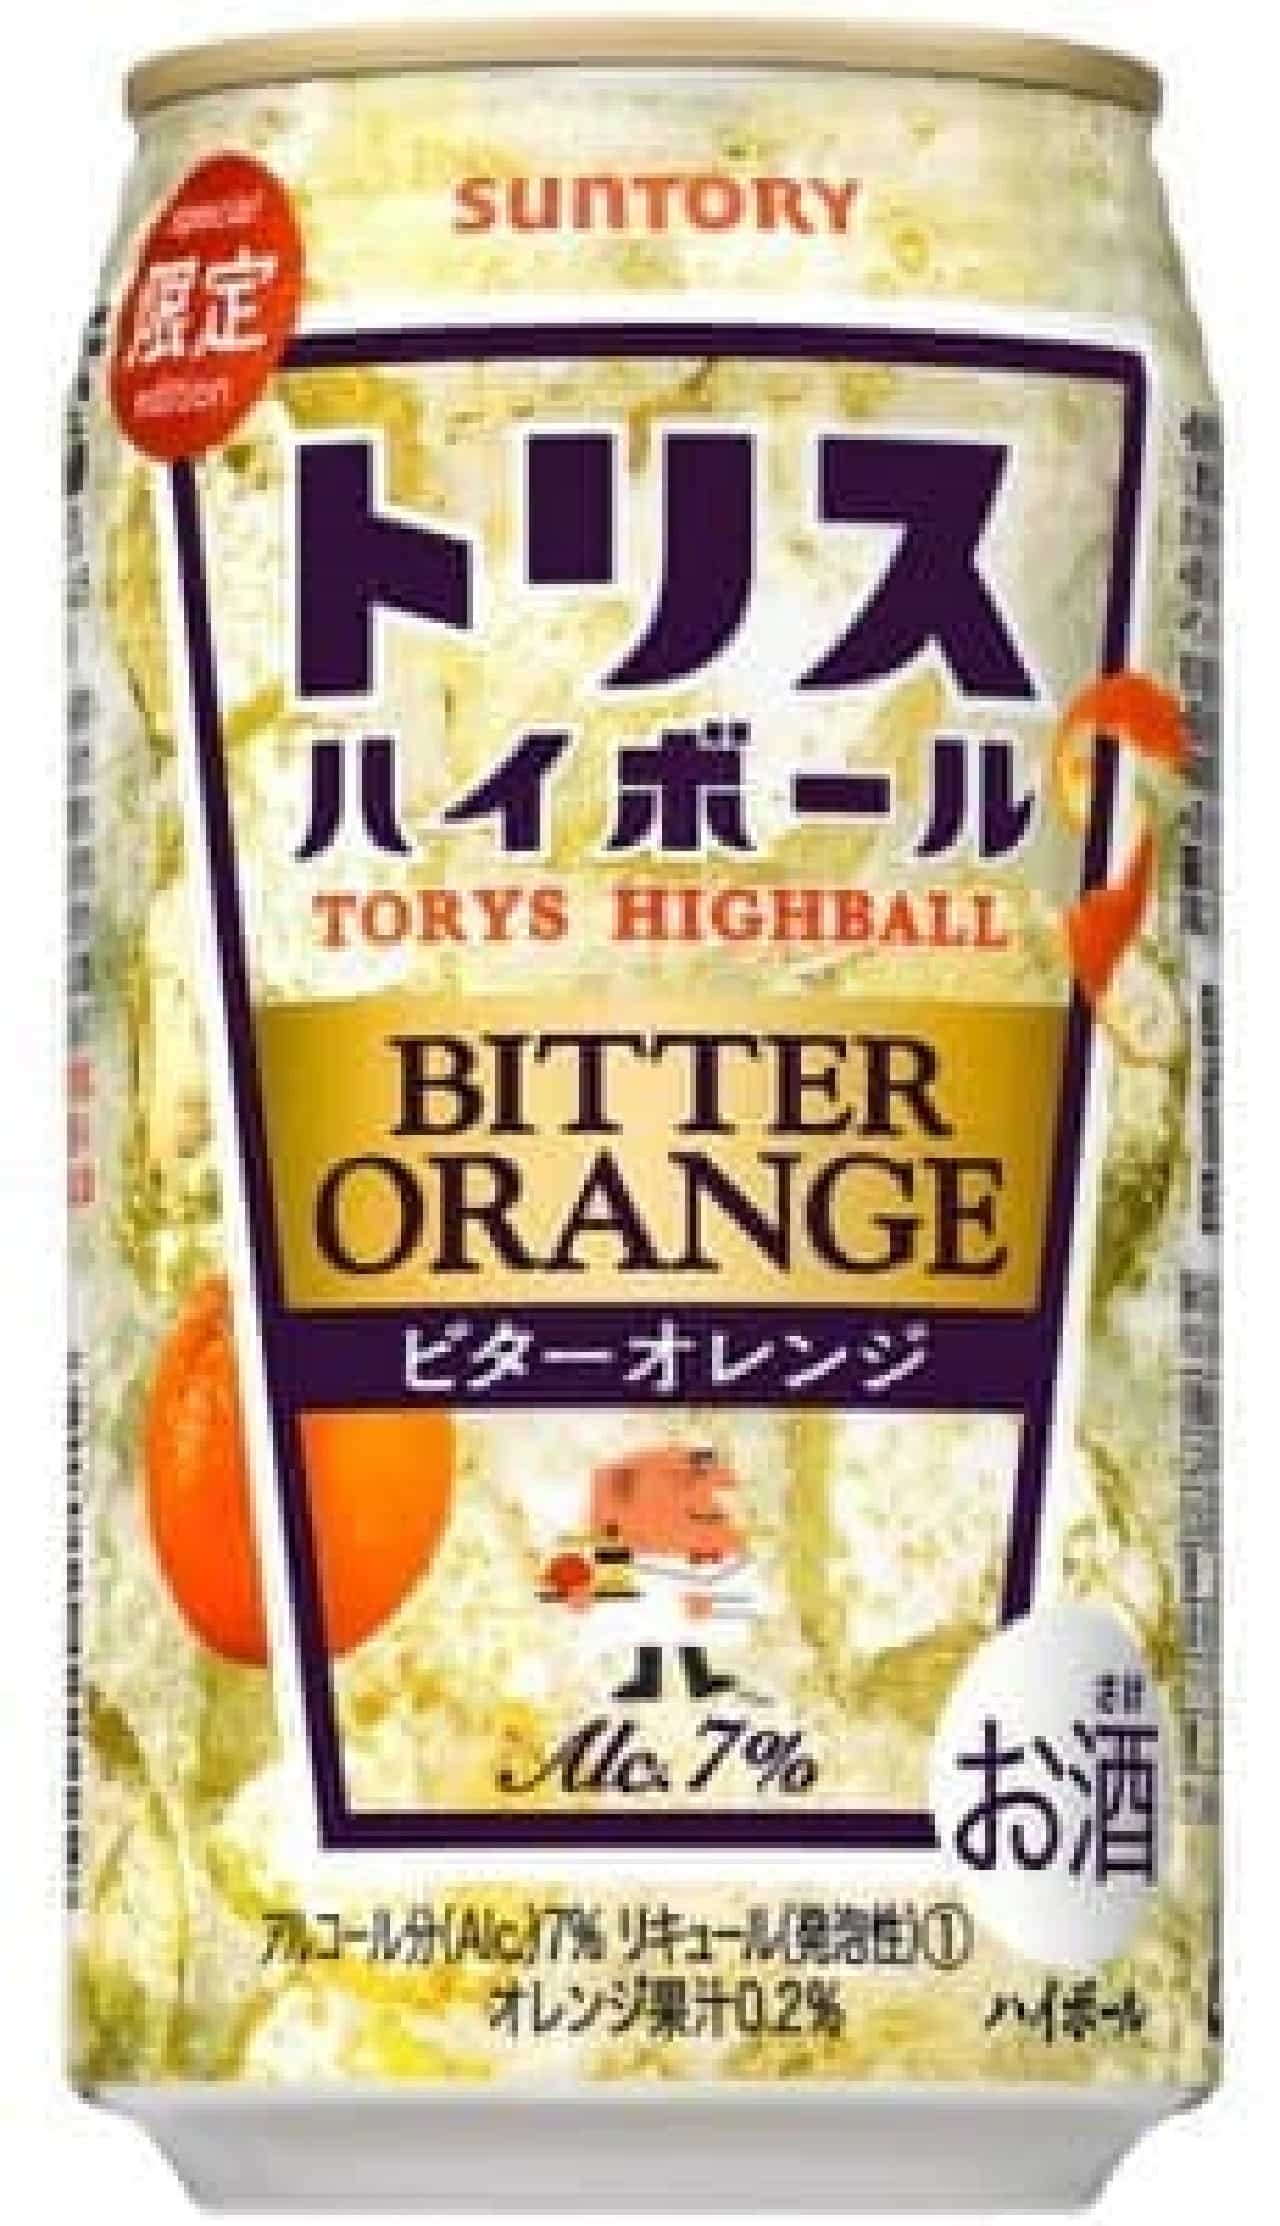 A refreshing orange flavor that goes well with early summer